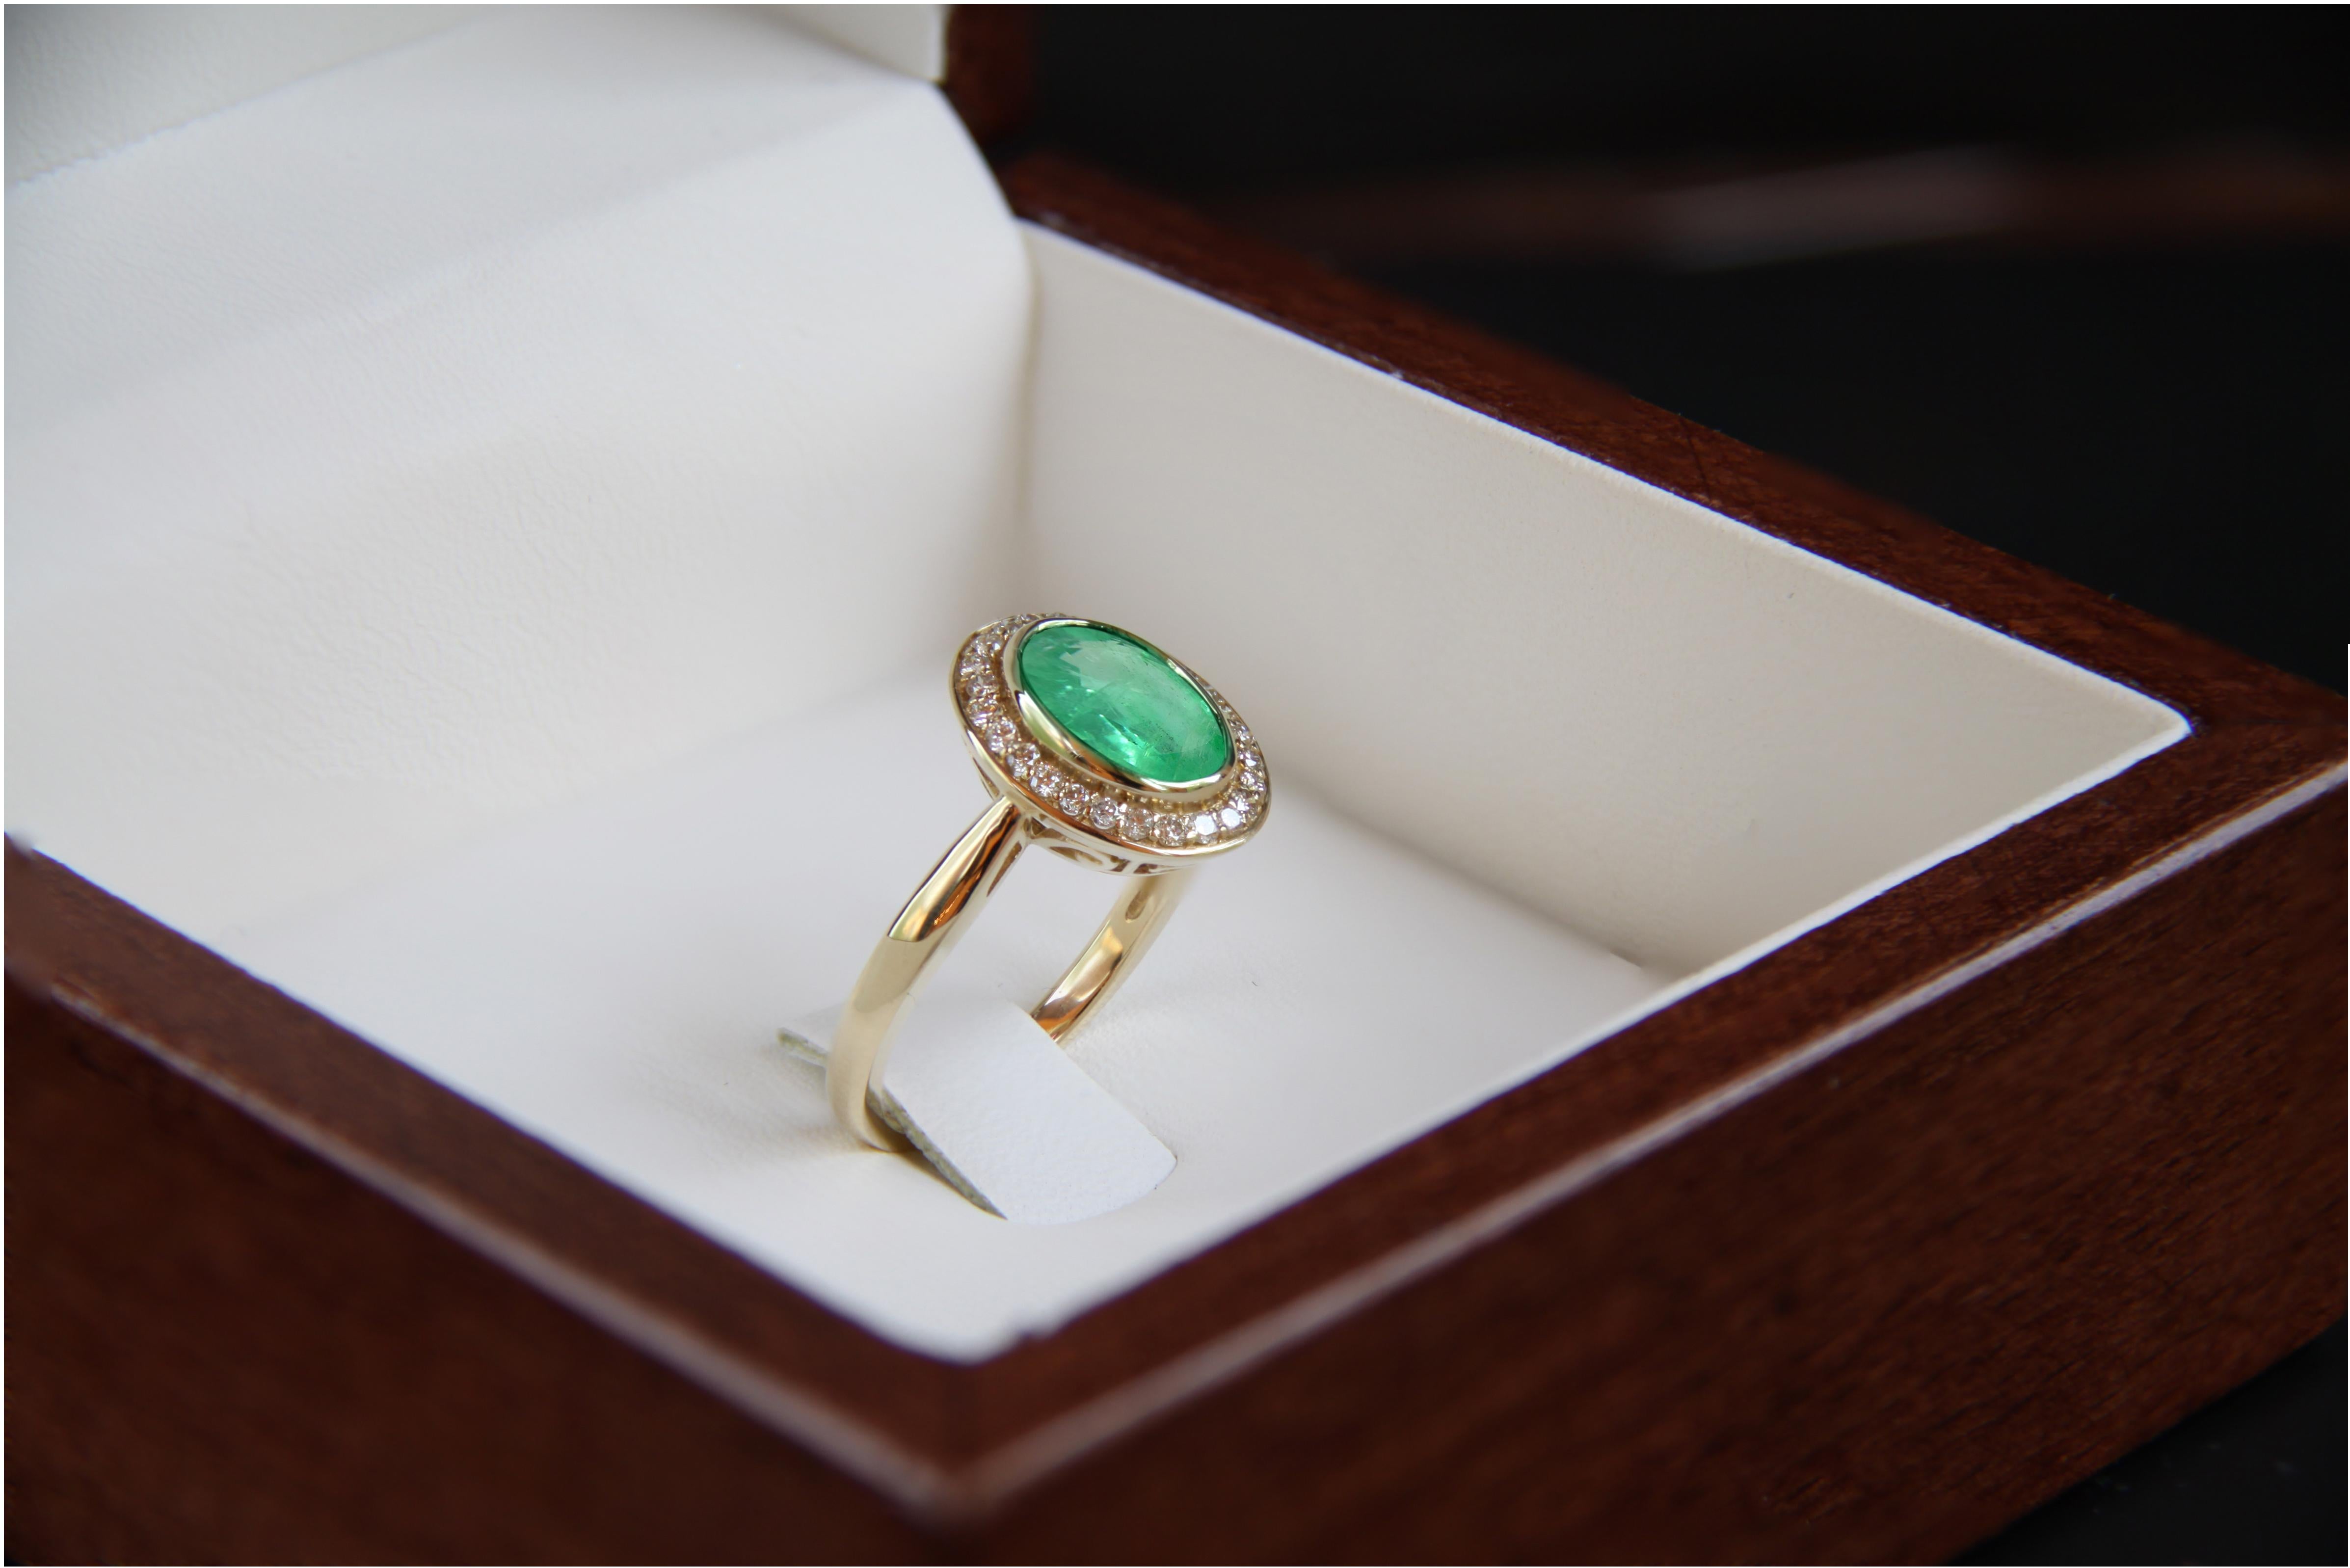 For Sale:  Emerald and diamonds 14k gold ring. 4